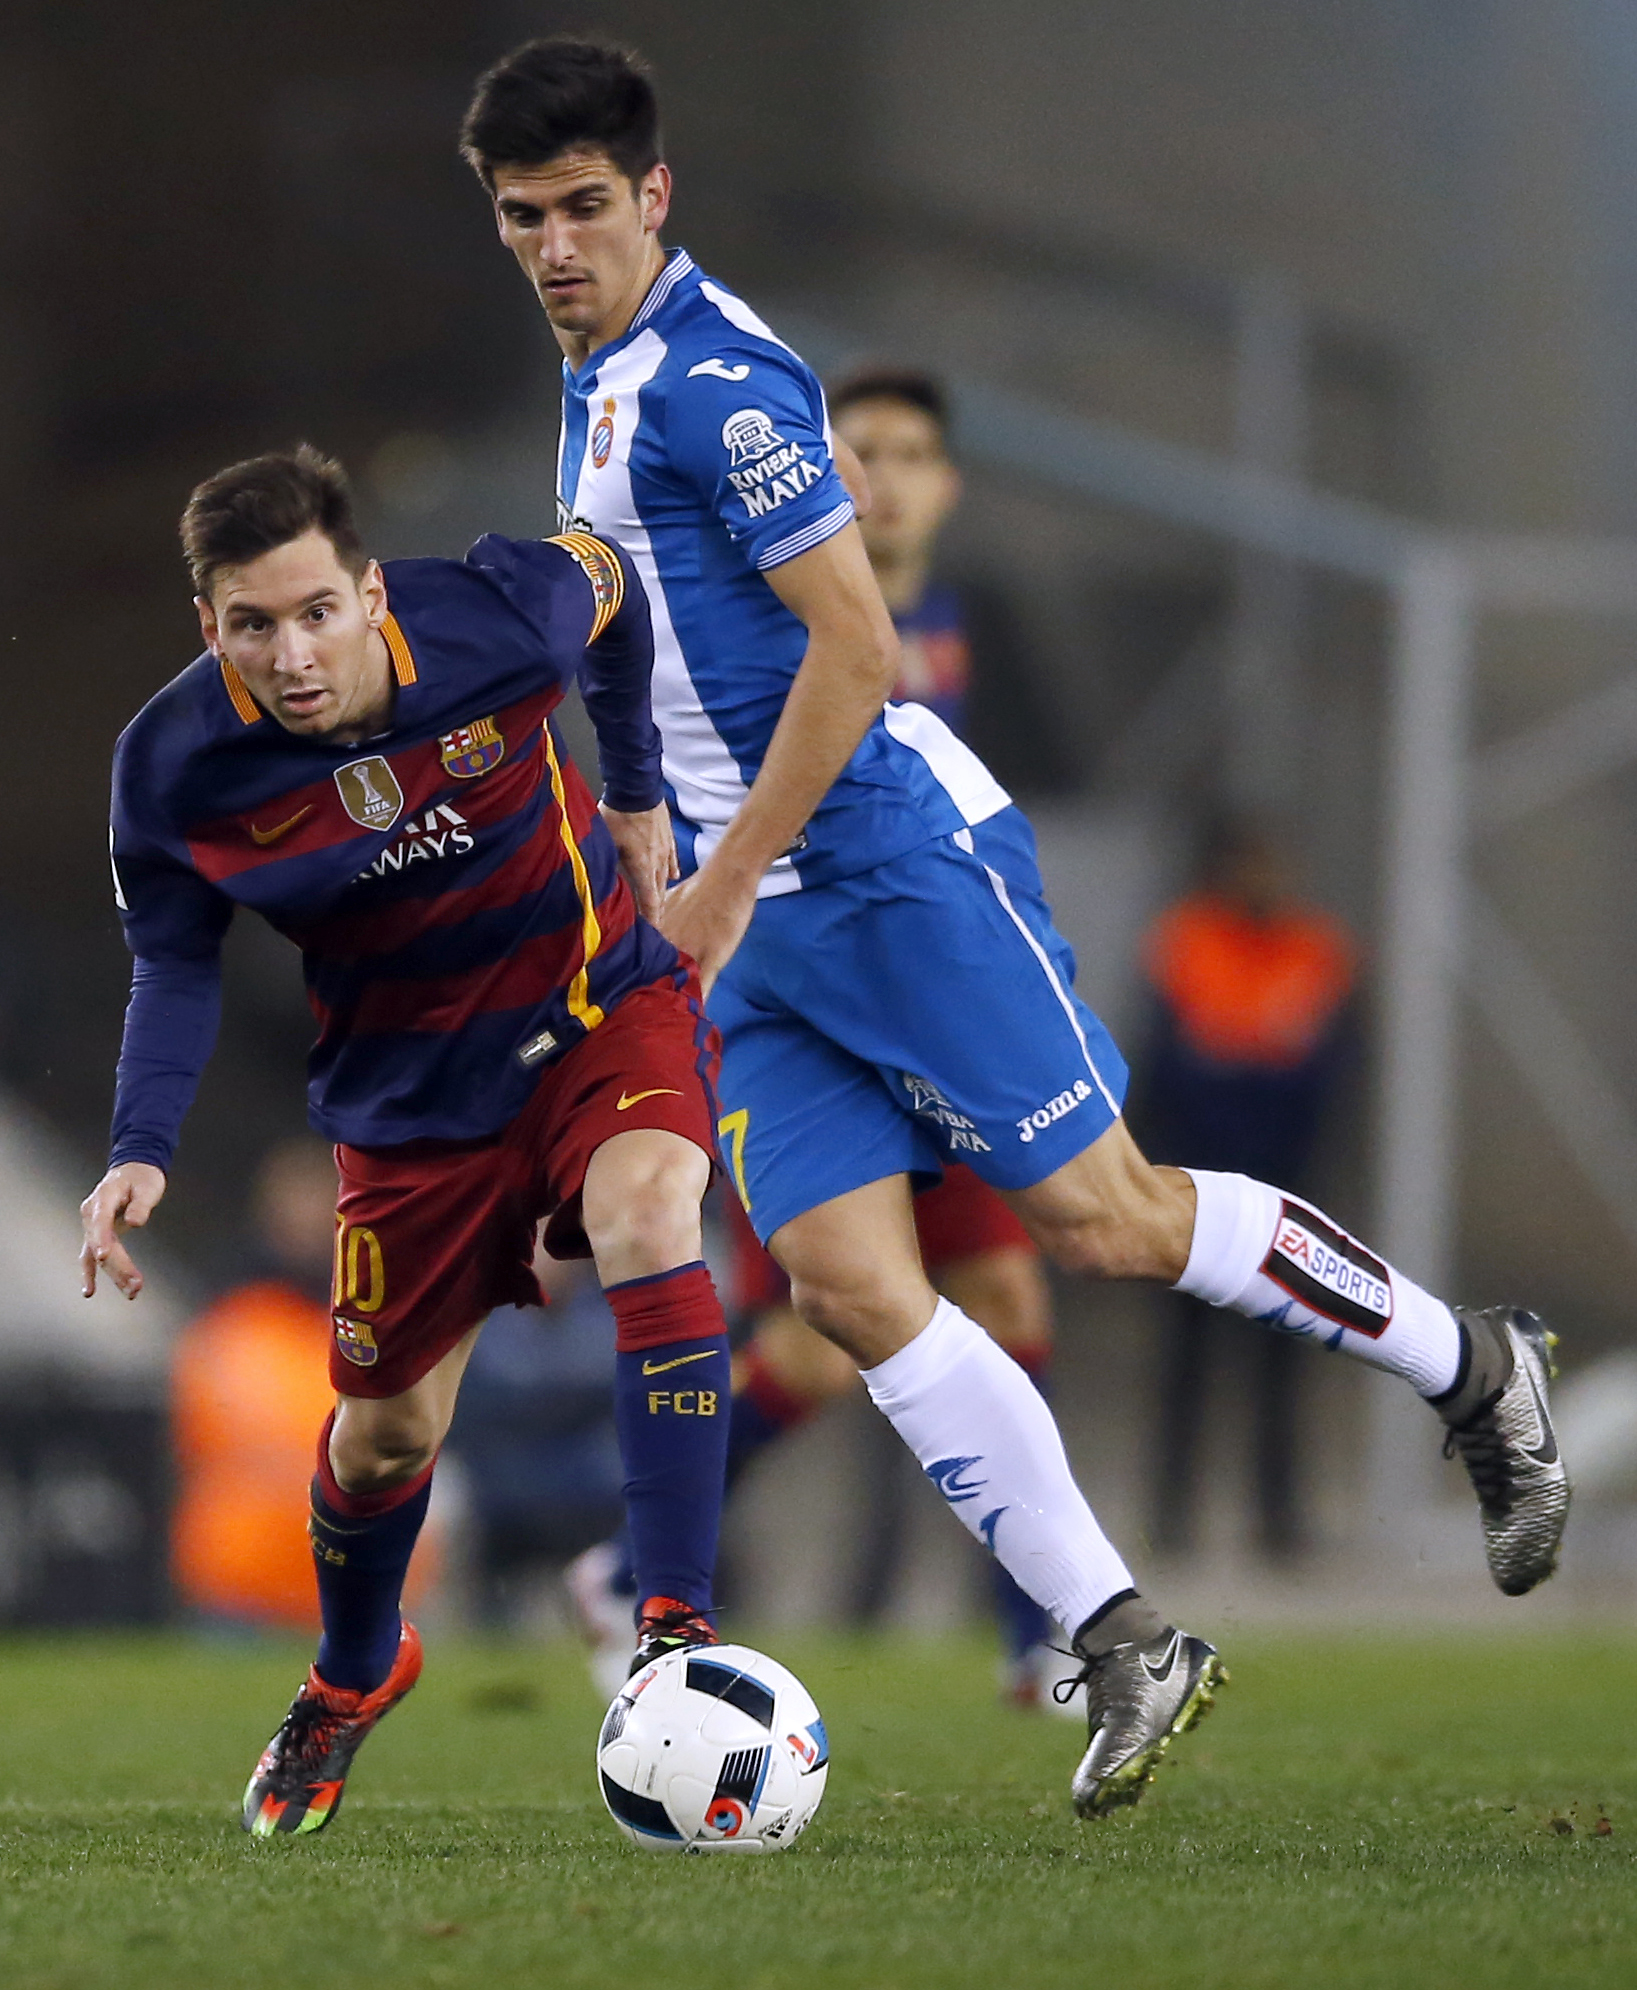 FC Barcelona's Lionel Messi, left, duels for the ball against Espanyol's Gerard Moreno during a Copa del Rey soccer match at RCDE stadium in Barcelona, Spain, Wednesday, Jan. 13, 2016. AP